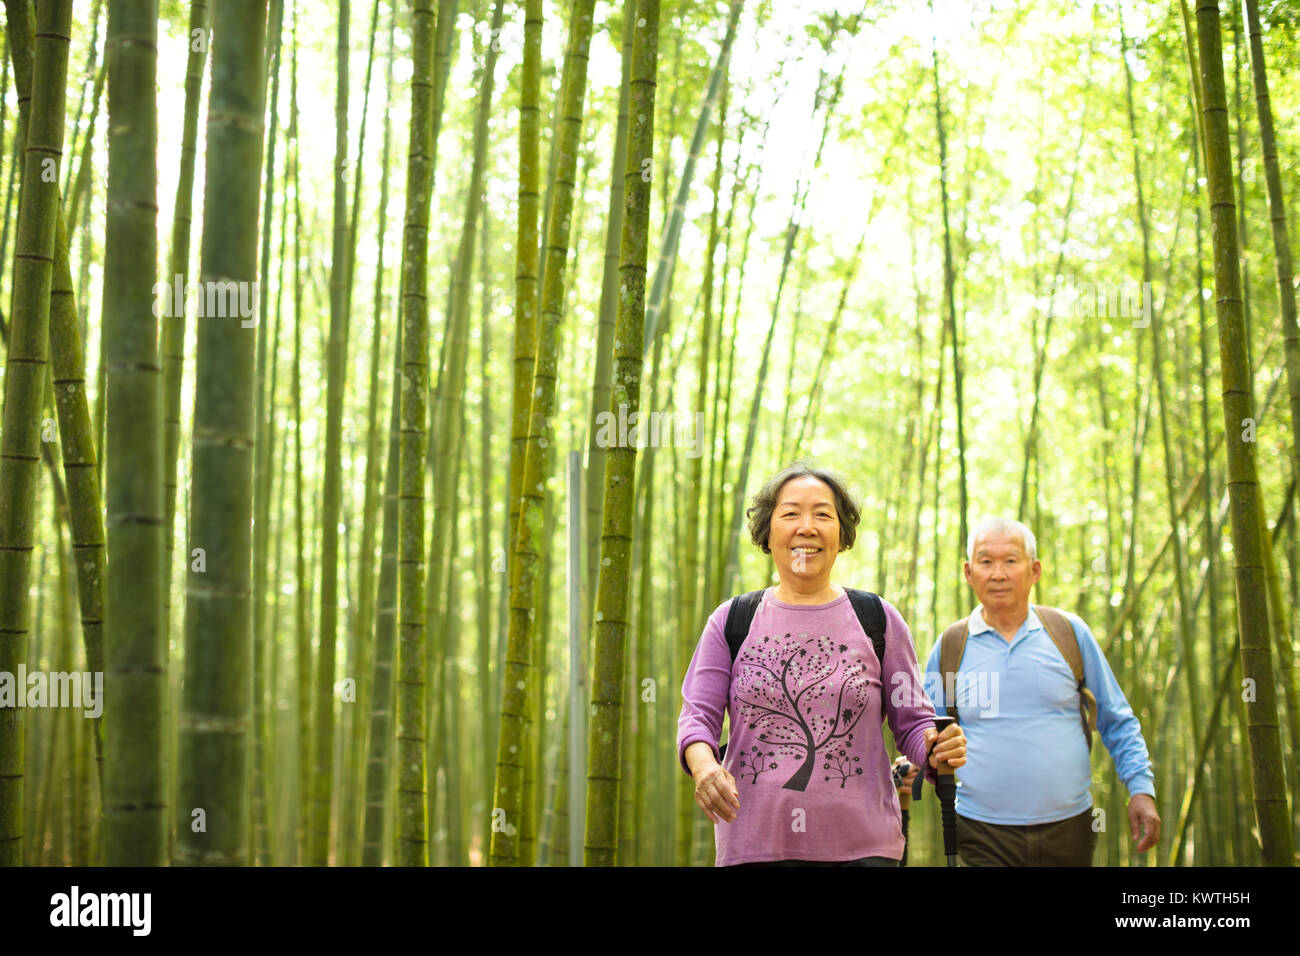 Senior Couple hiking in green bamboo forest  Stock Photo